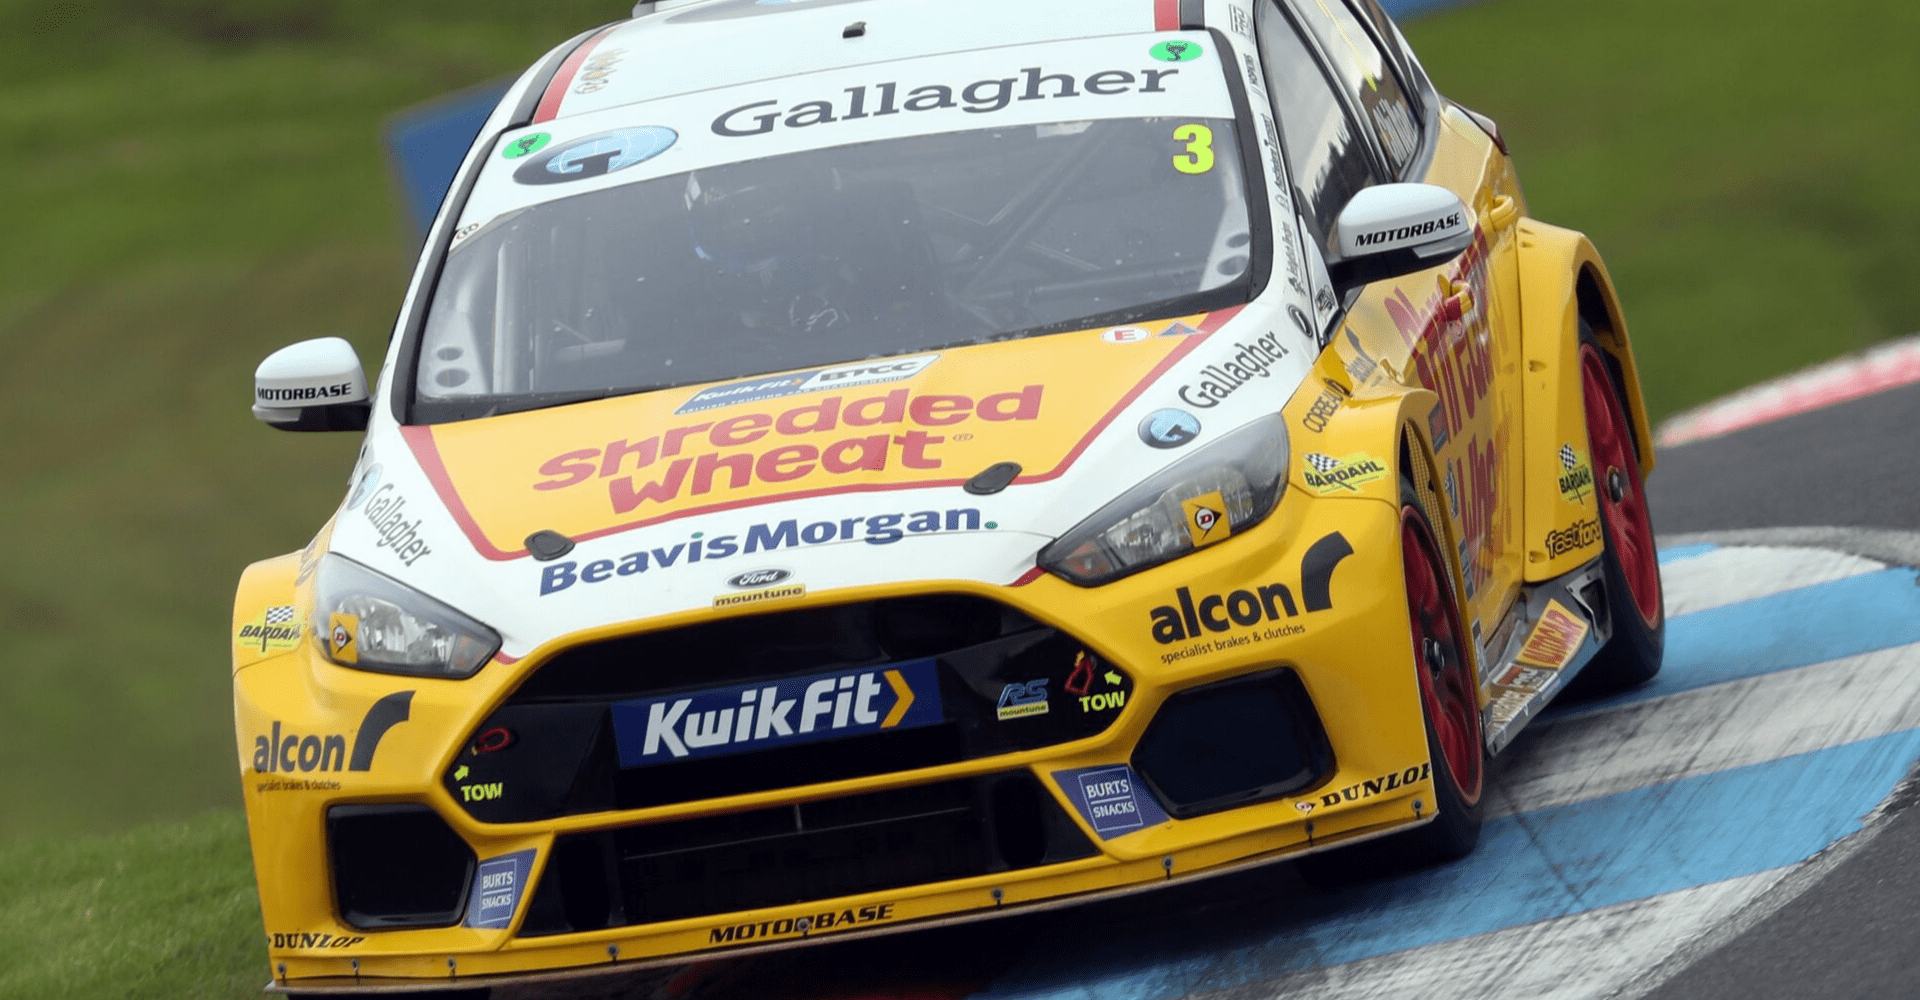 Positive weekend for Team Shredded Wheat Racing with Gallagher at Knockhill